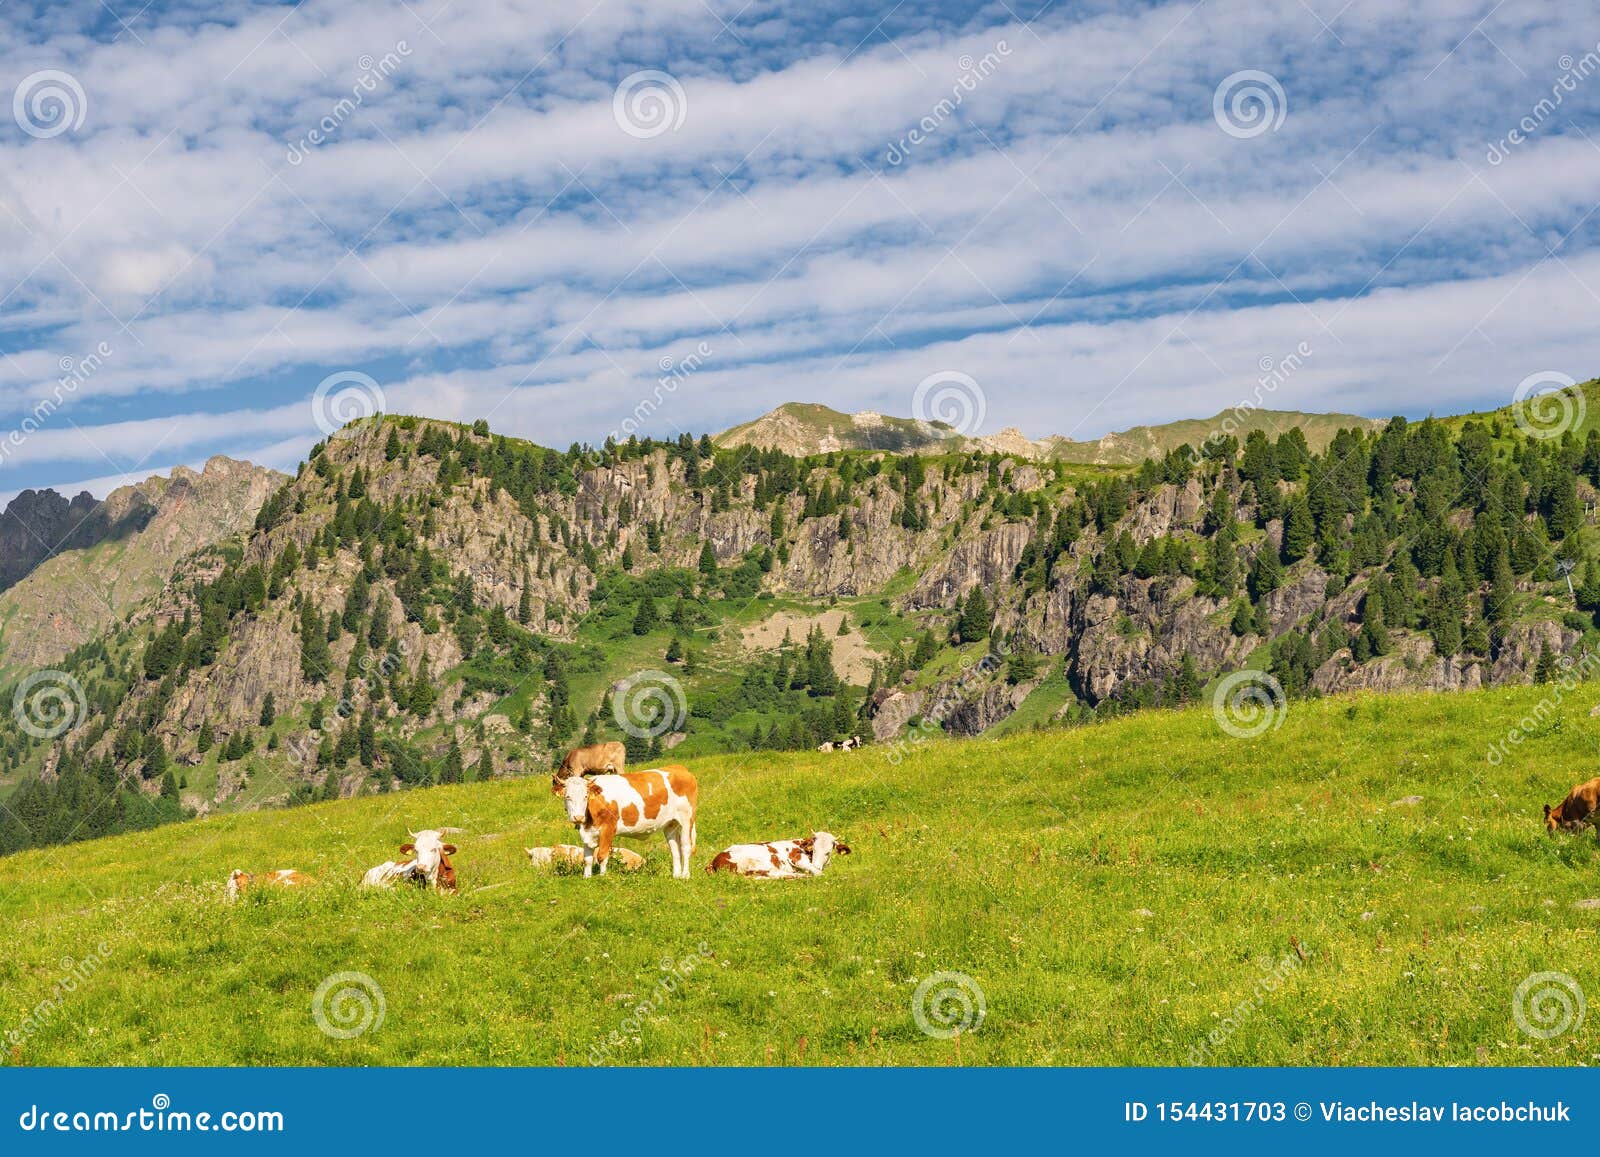 Beautiful Alps With Livestock On Green Pasture Stock Image Image Of